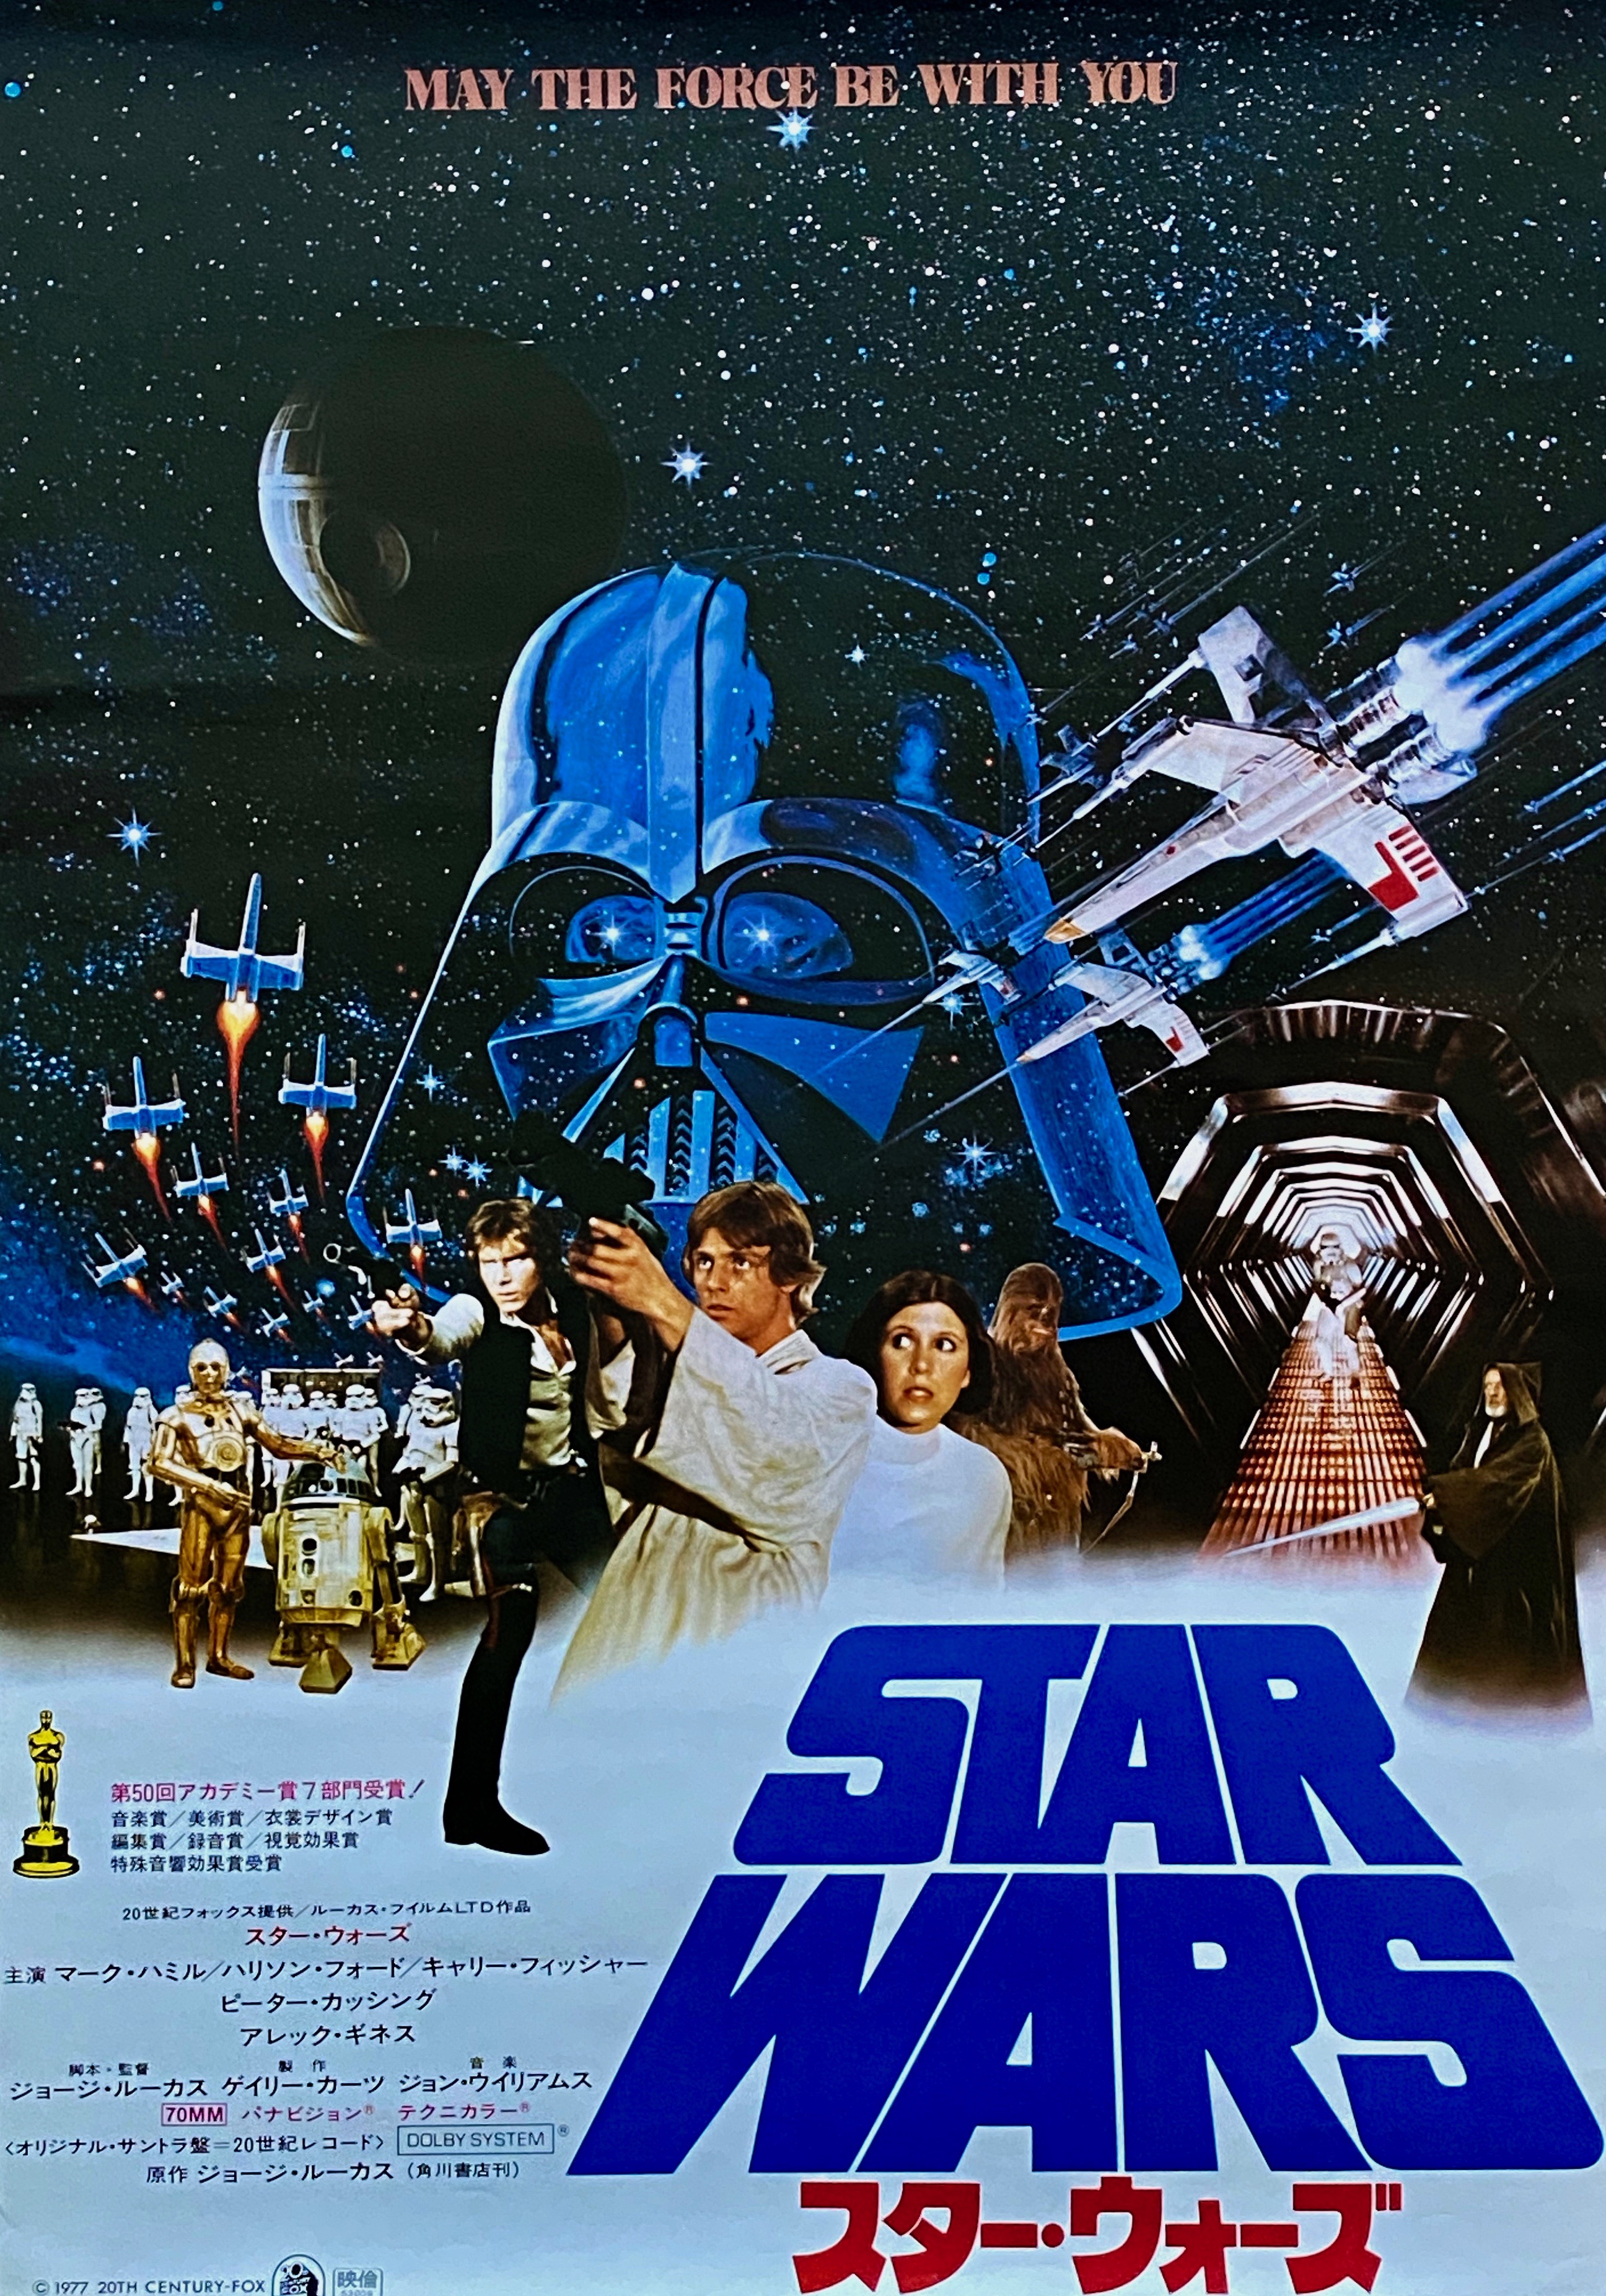 STAR WARS EPISODE IV A NEW HOPE Movie Poster Film Print